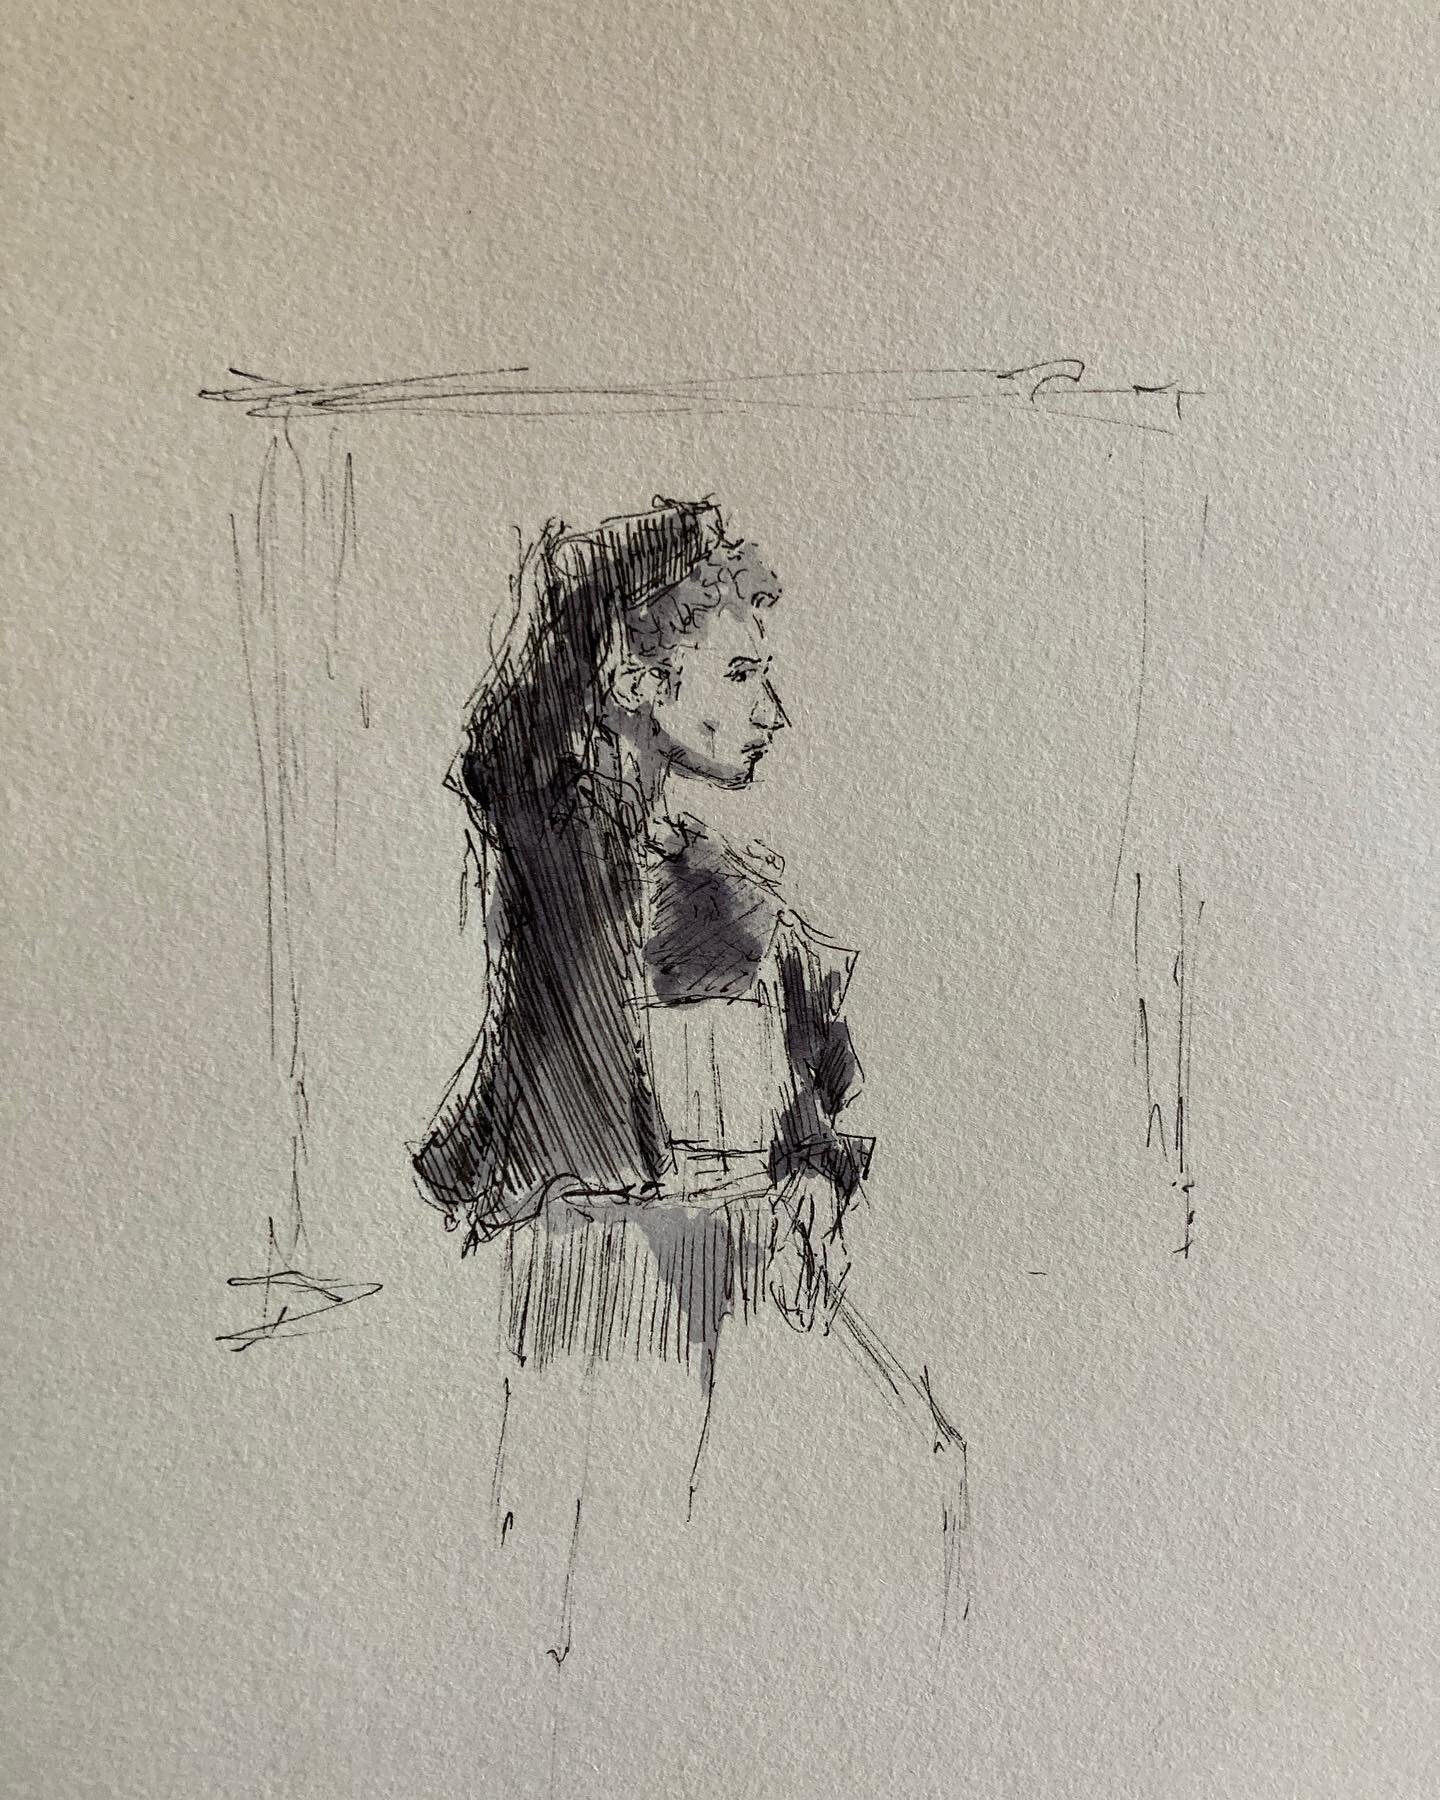 Ink studies of people I know irl from snapshots of them doing their thing - here&rsquo;s @crespalita doing one of their things which is movement based practice.